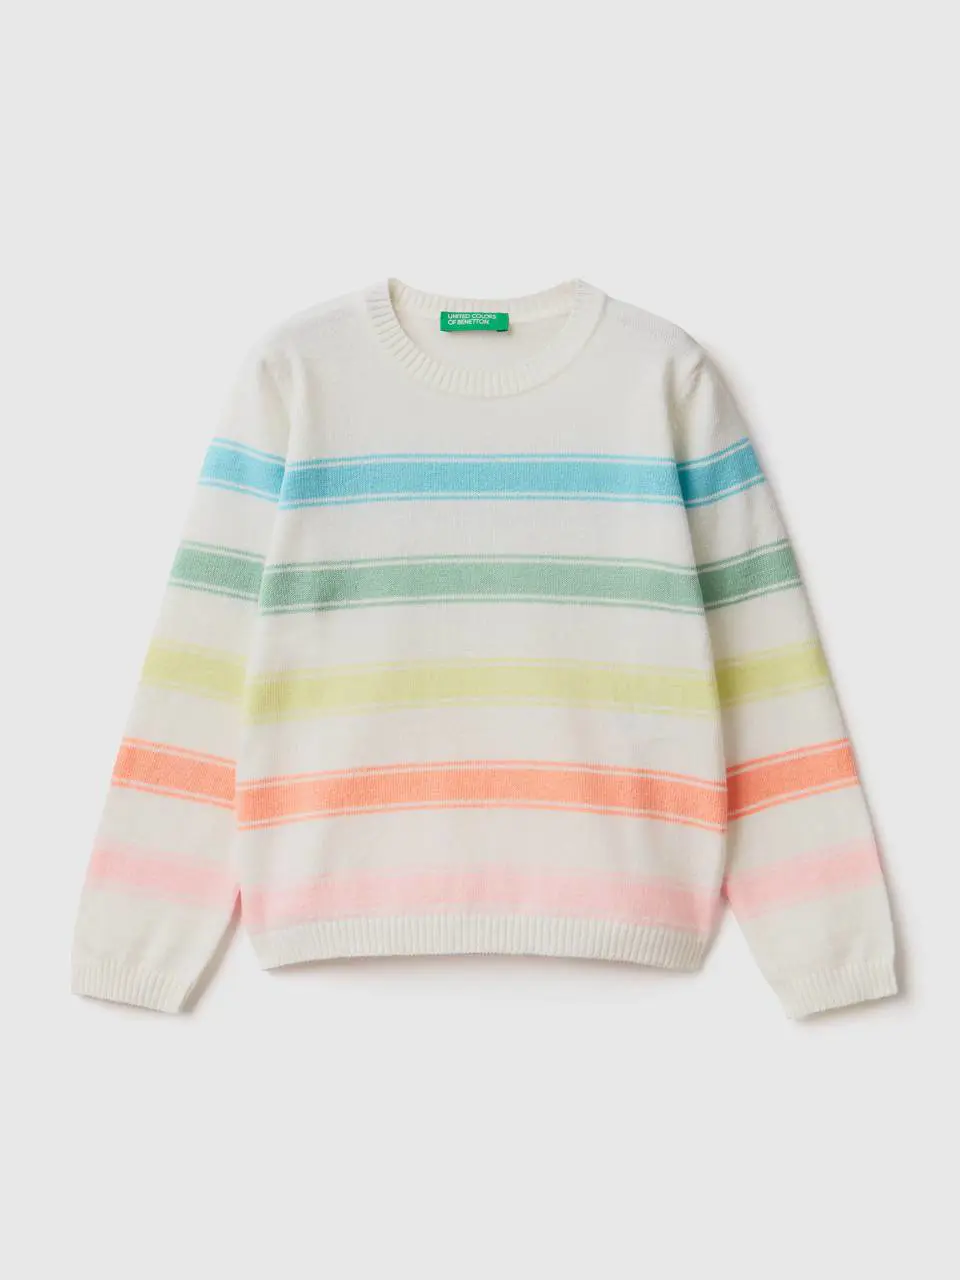 Benetton striped sweater in cotton blend. 1